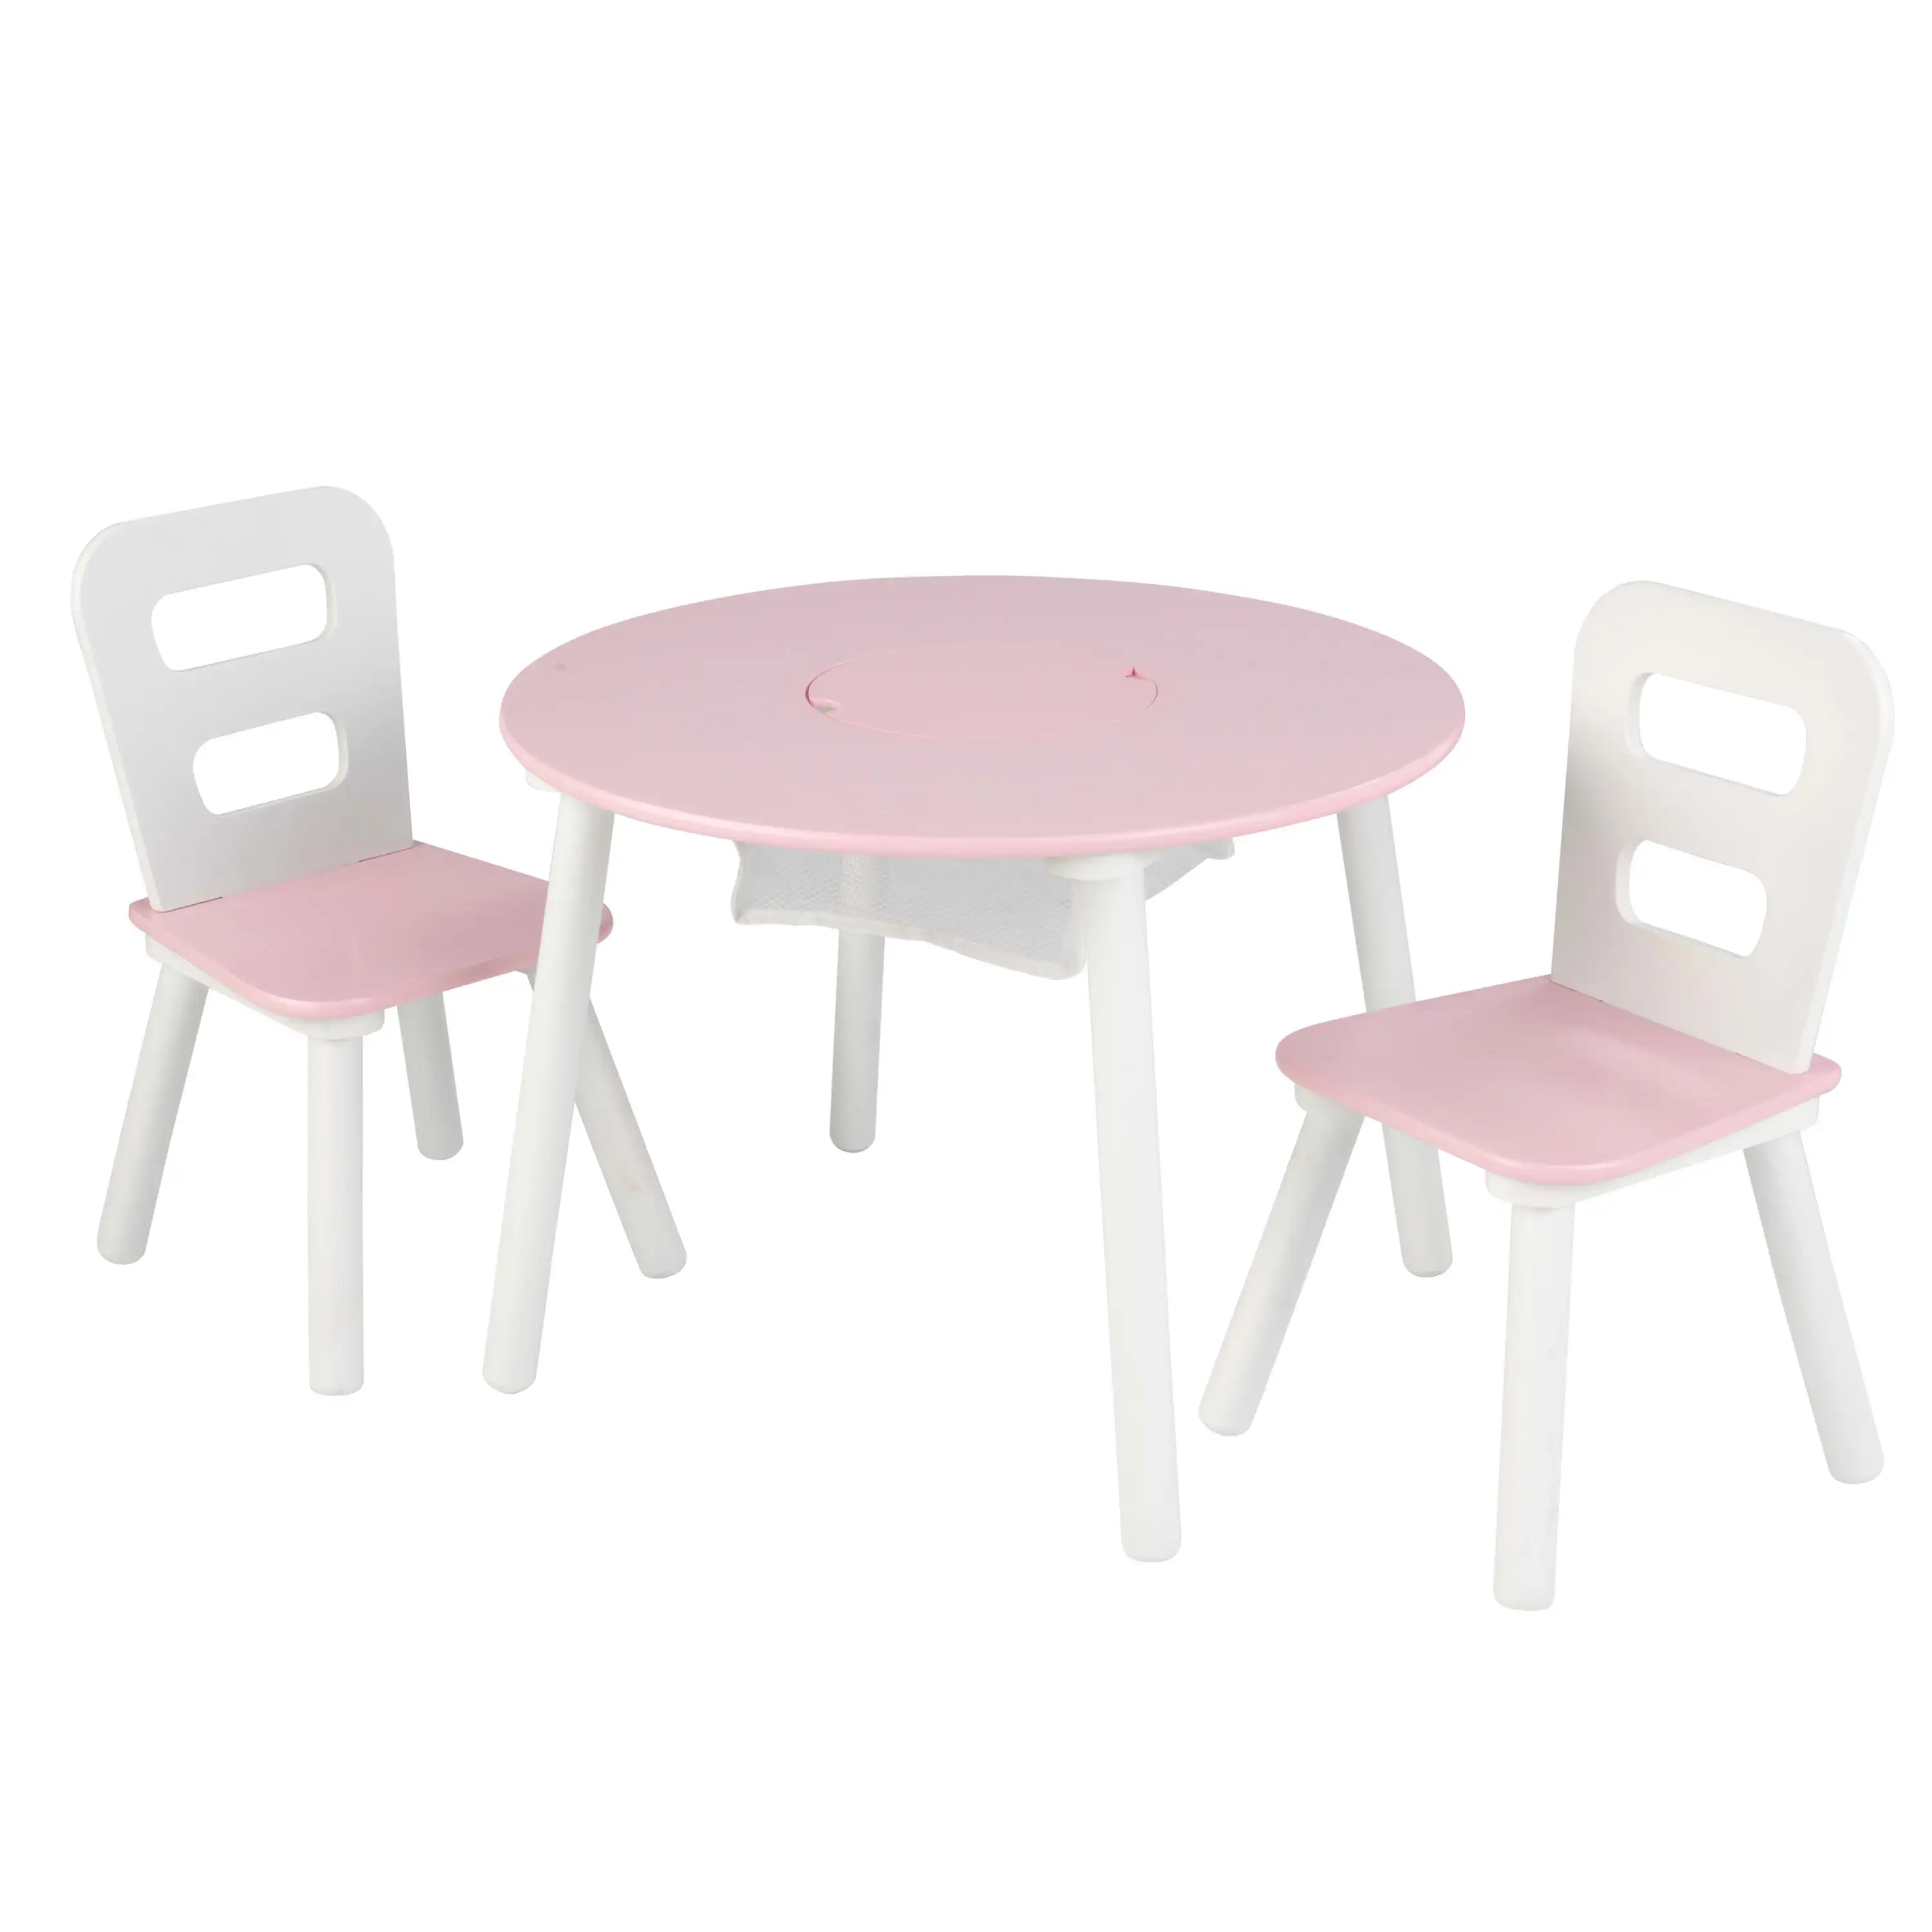 

KidKraft Wooden Kids Round Storage Table & 2 Chair Set, Pink & White, For Ages 3+